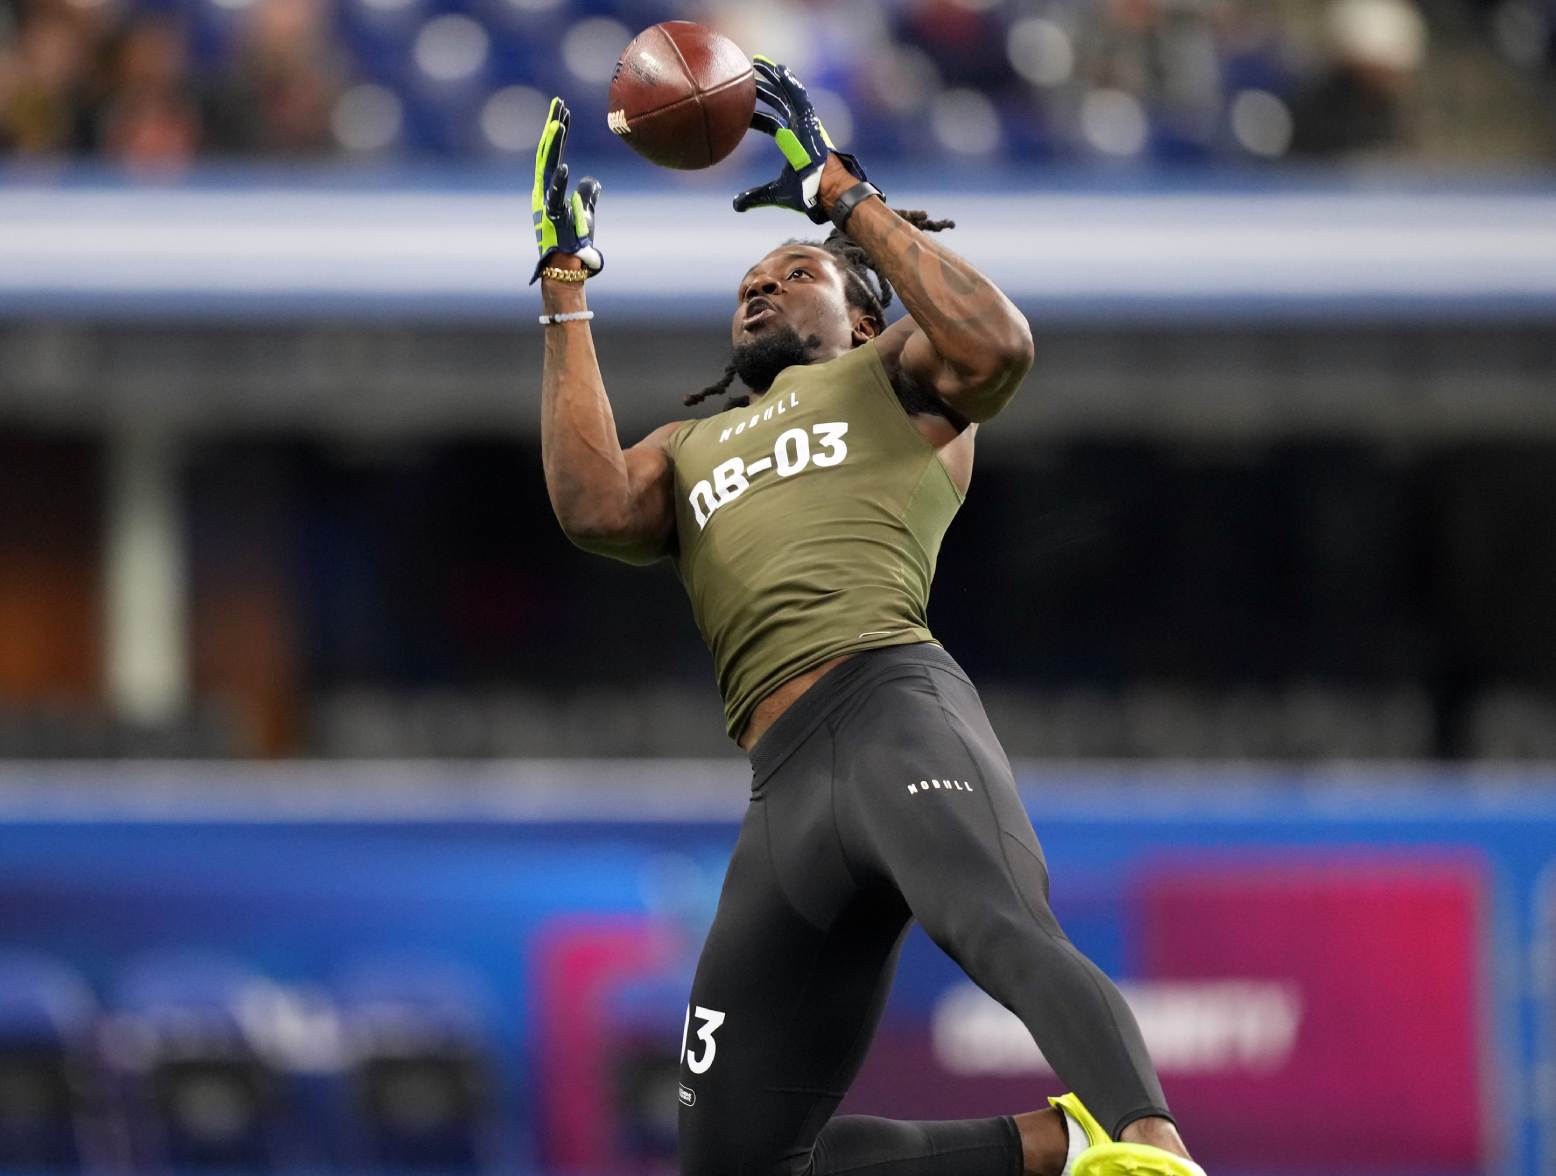 Mar 1, 2024; Indianapolis, IN, USA; Louisville defensive back Jarvis Brownlee (DB03) works out during the 2024 NFL Combine at Lucas Oil Stadium. Credit: Kirby Lee-USA TODAY Sports